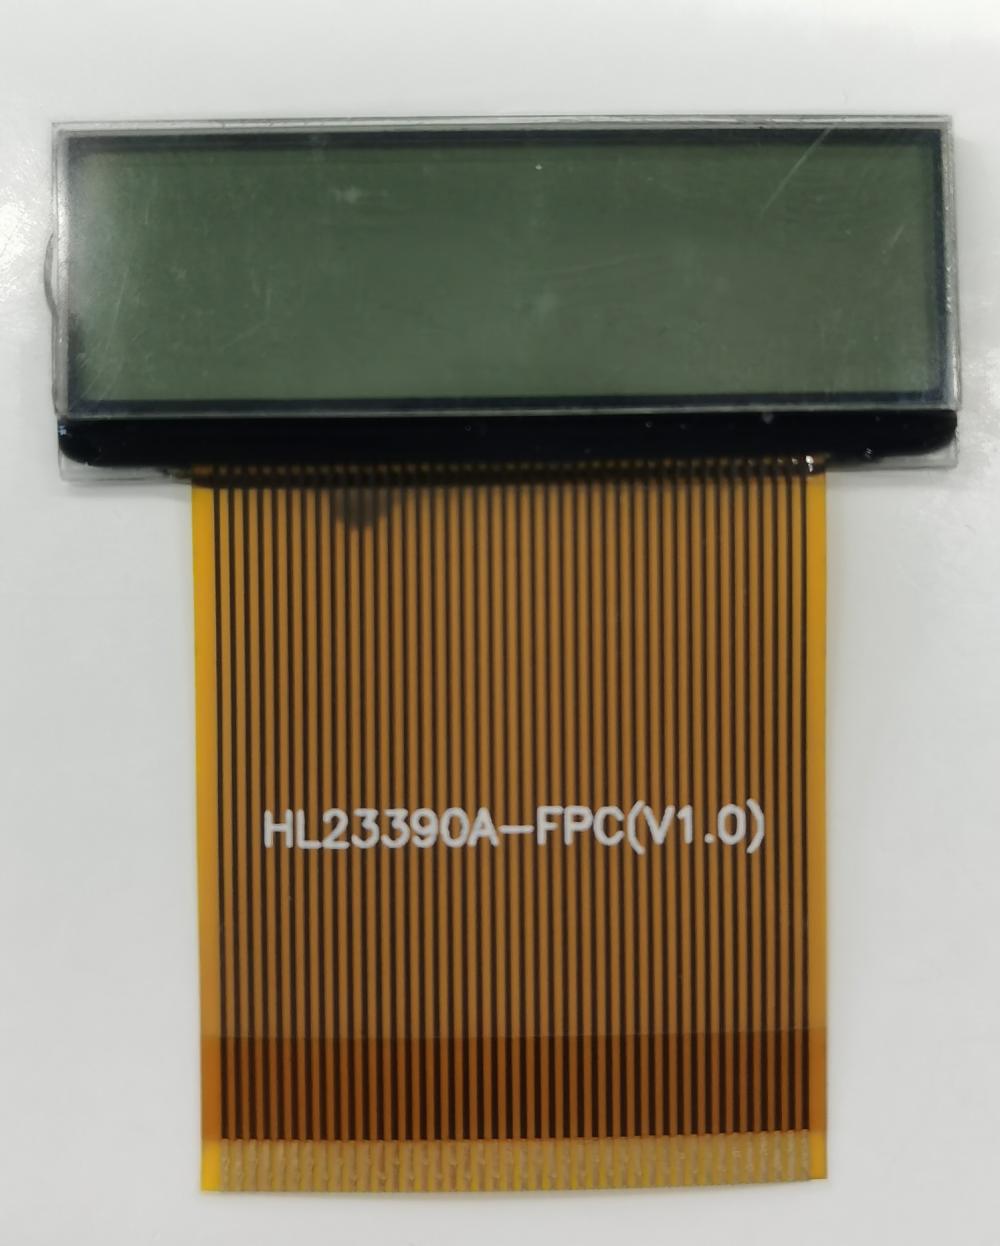 2.4 inch lcd TFT touch screen